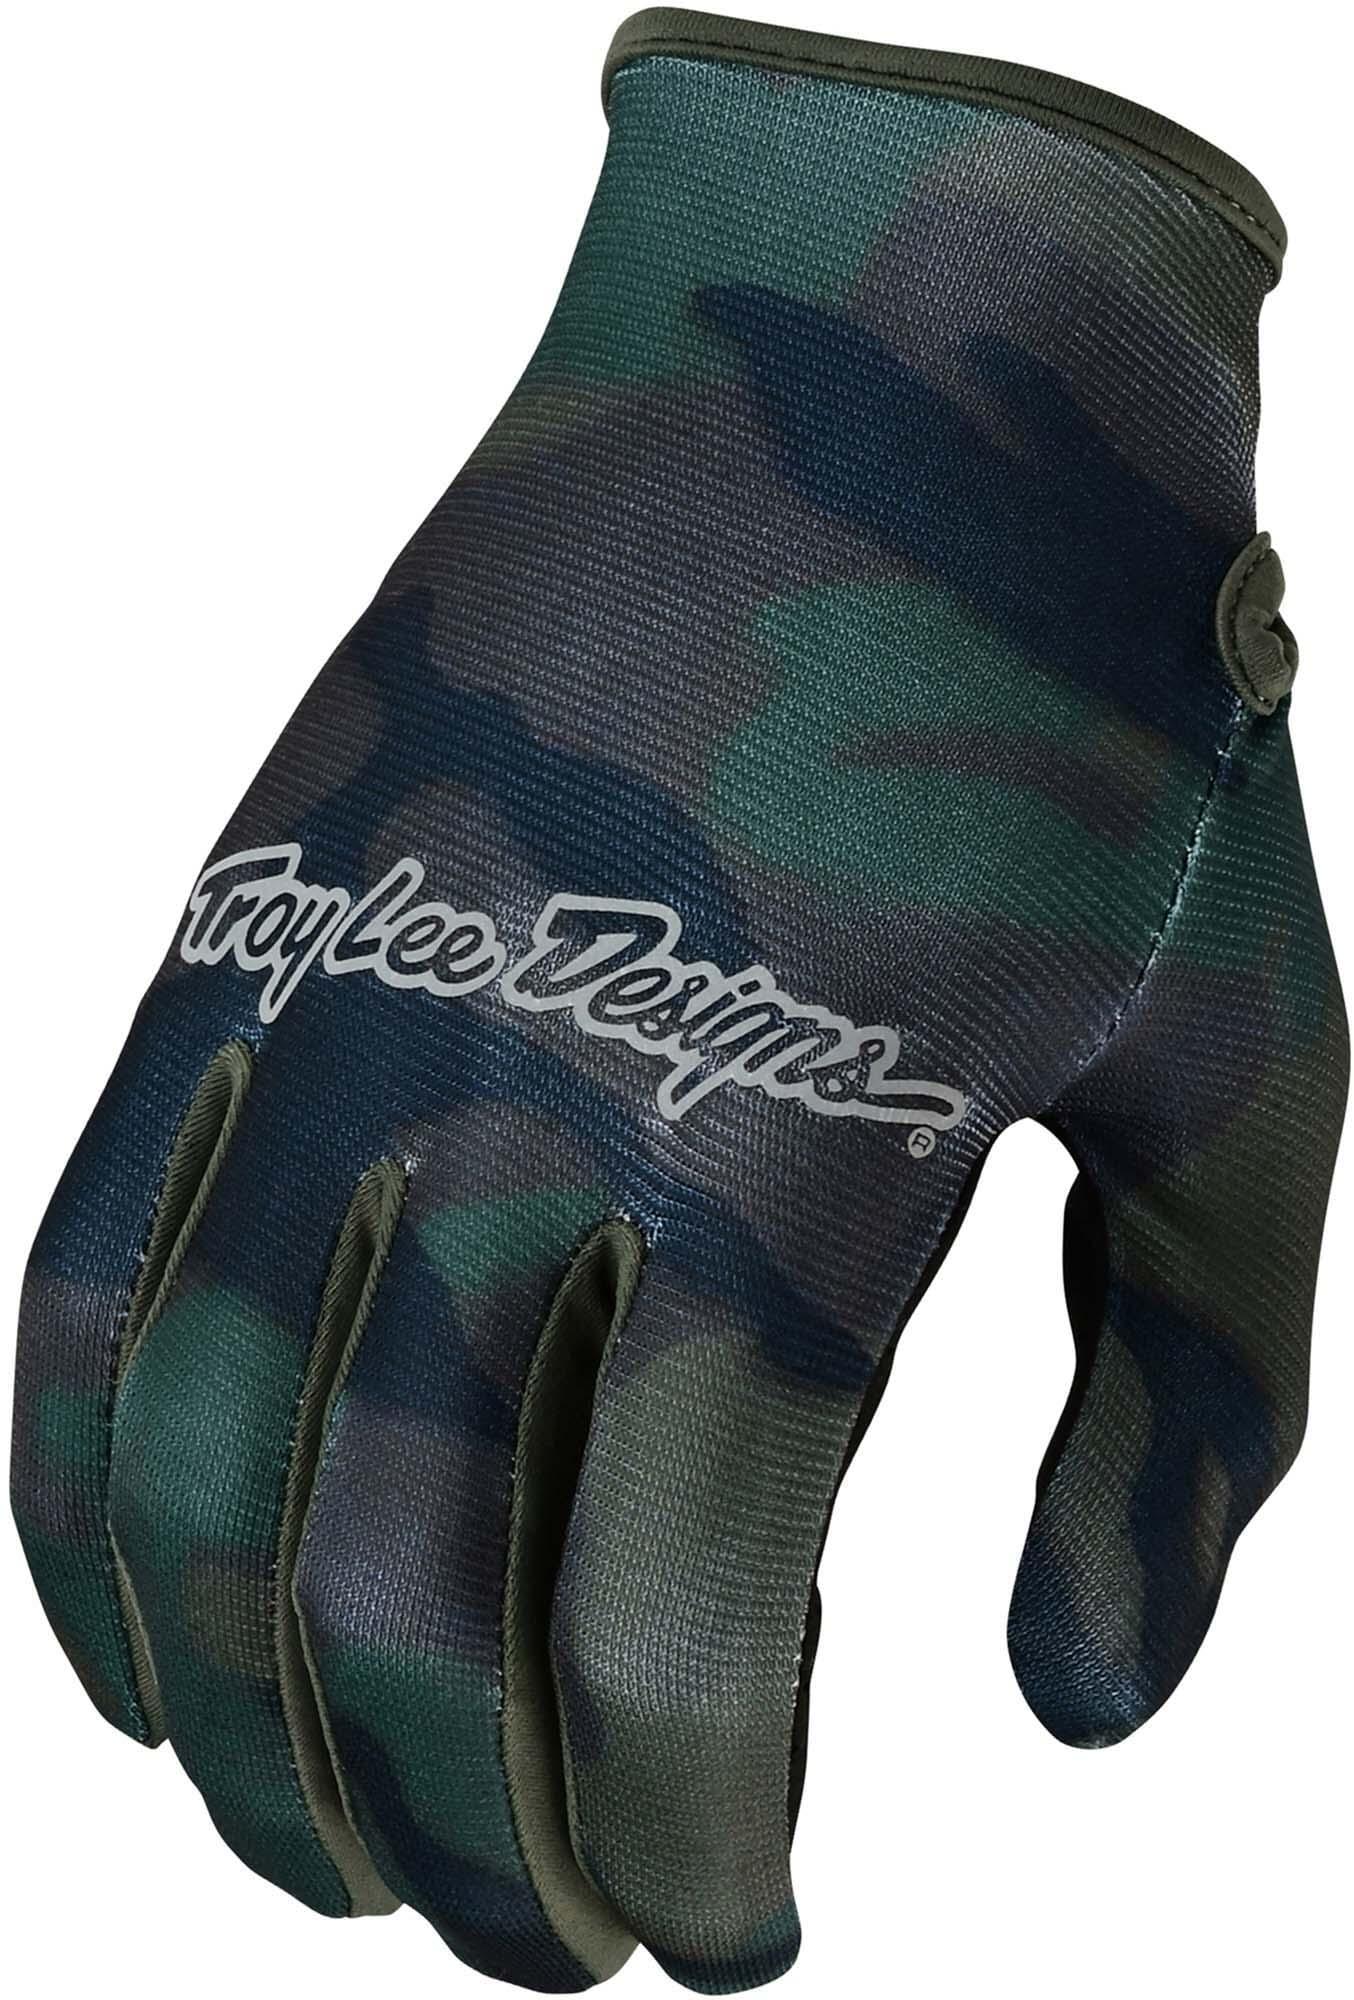 Troy Lee Designs Flowline Gloves - Brushed Camo Army